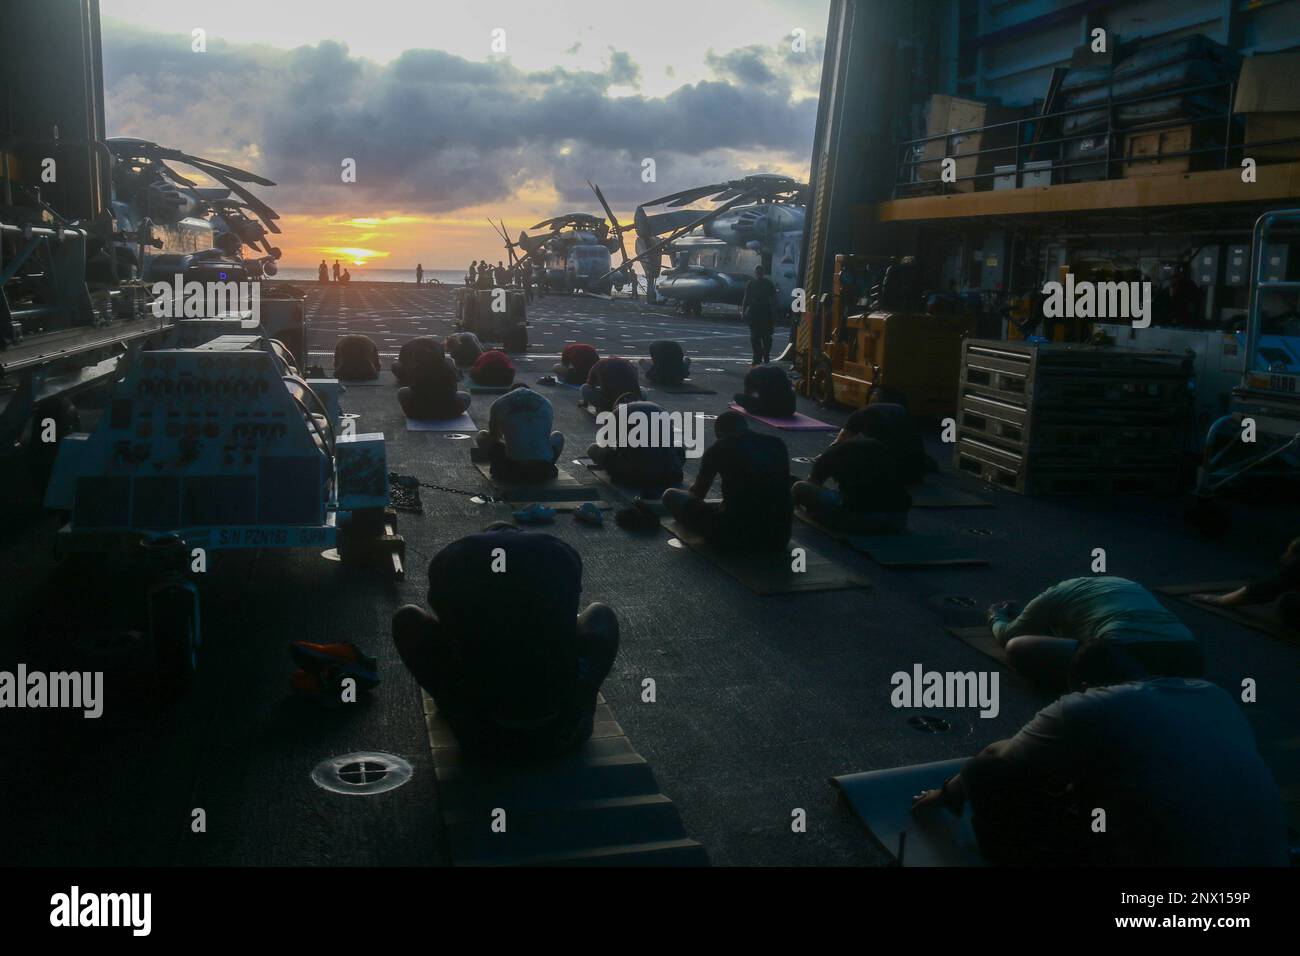 SOUTH CHINA SEA (Feb. 4, 2023) - Sailors, and Marines with the 13th Marine Expeditionary Unit, participate in a yoga class during sunset aboard amphibious transport dock ship USS John P. Murtha (LPD 26), Feb. 4 2023. Fitness is an integral part of the life of Sailors and Marines onboard, producing and strengthening a more competitive and lethal force. The Makin Island Amphibious Ready Group, comprised of amphibious assault ship USS Makin Island (LHD 8) and amphibious transport docks USS Anchorage (LPD 23) and USS John P. Murtha (LPD 26), is operating in the U.S. 7th Fleet area of operations wi Stock Photo